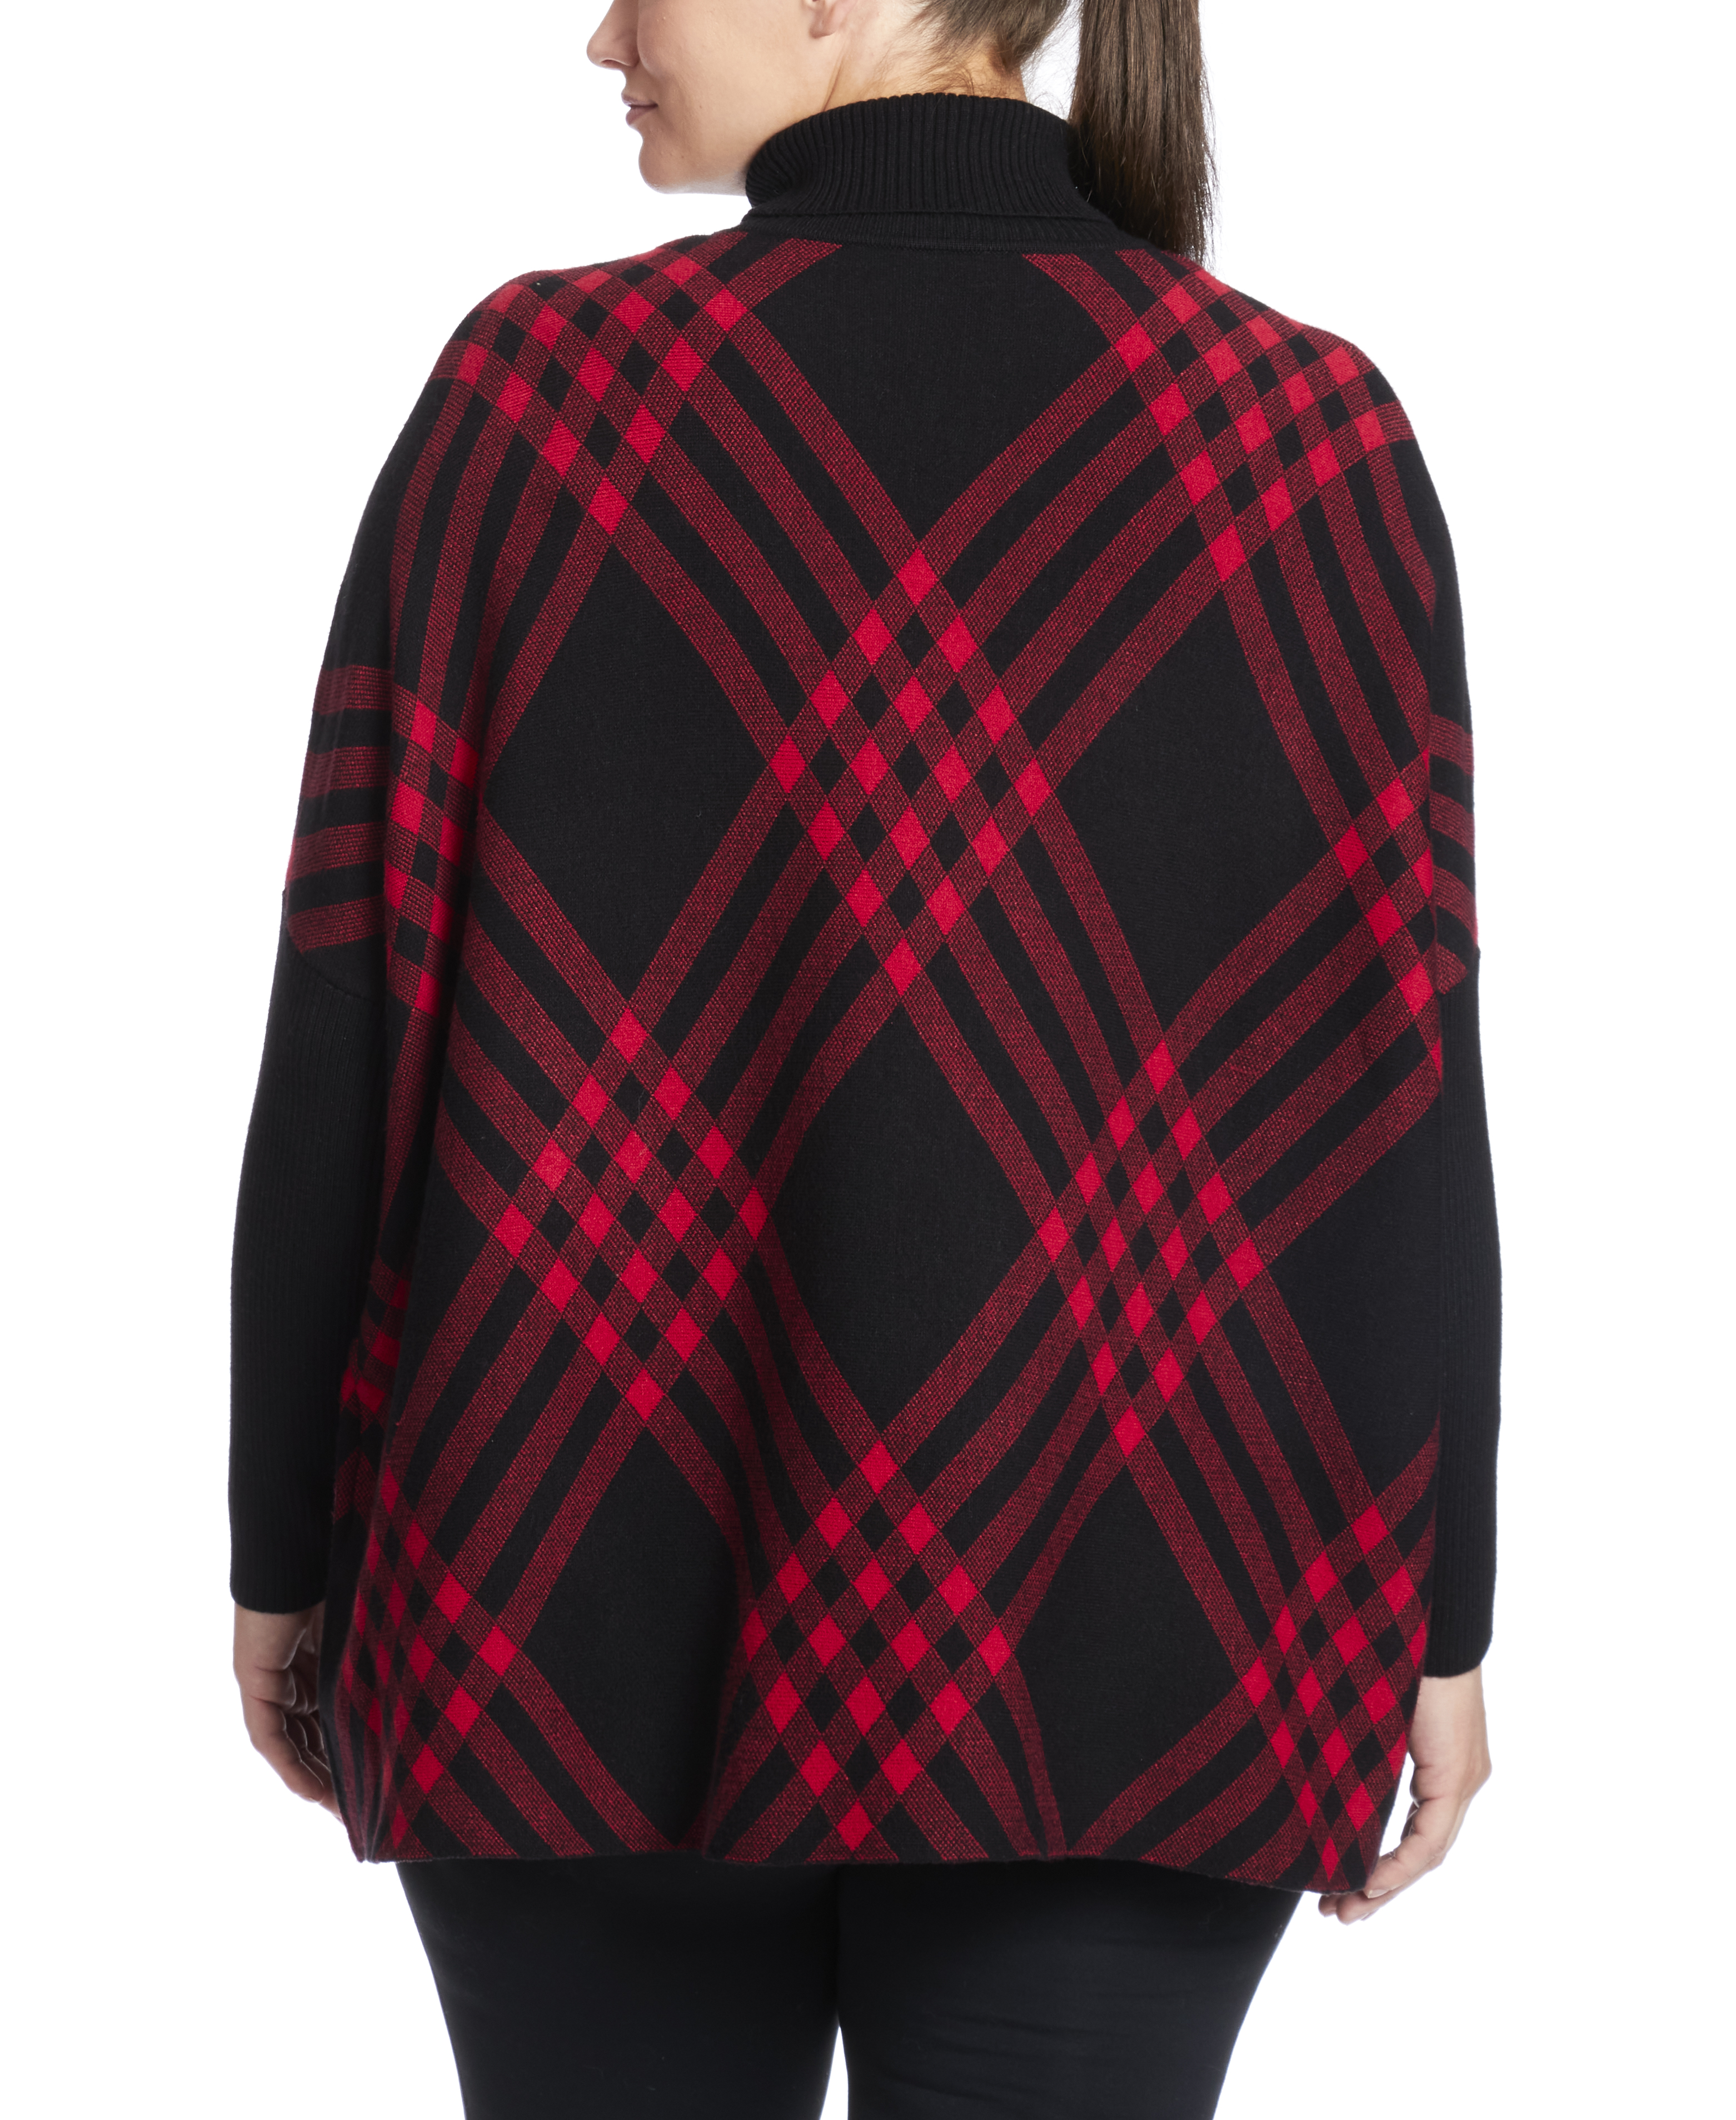 Turtleneck Poncho Sweater in Giles Plaid